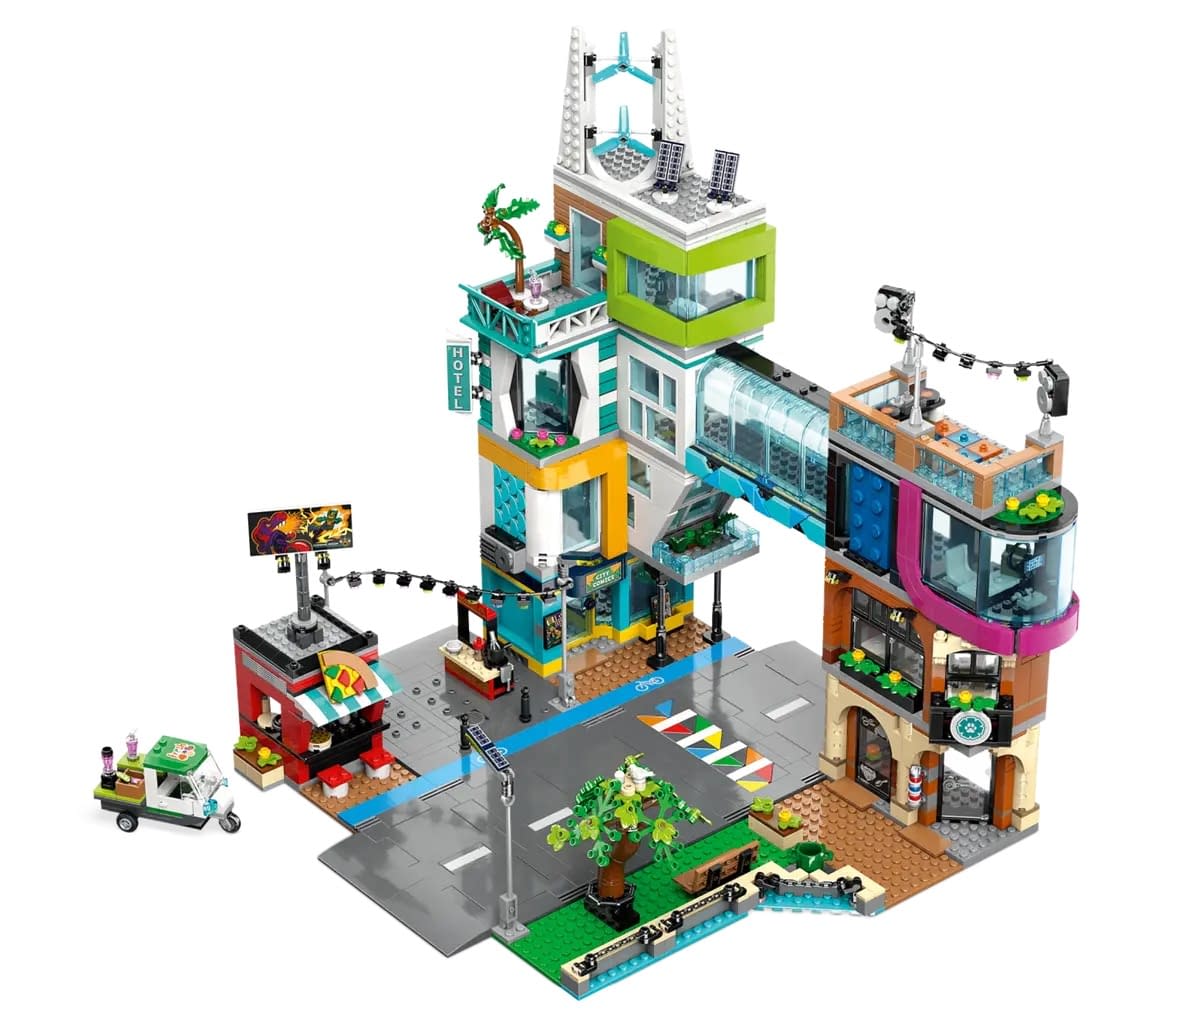 Find Some Prime Real Estate with the LEGO City Apartment Building Set